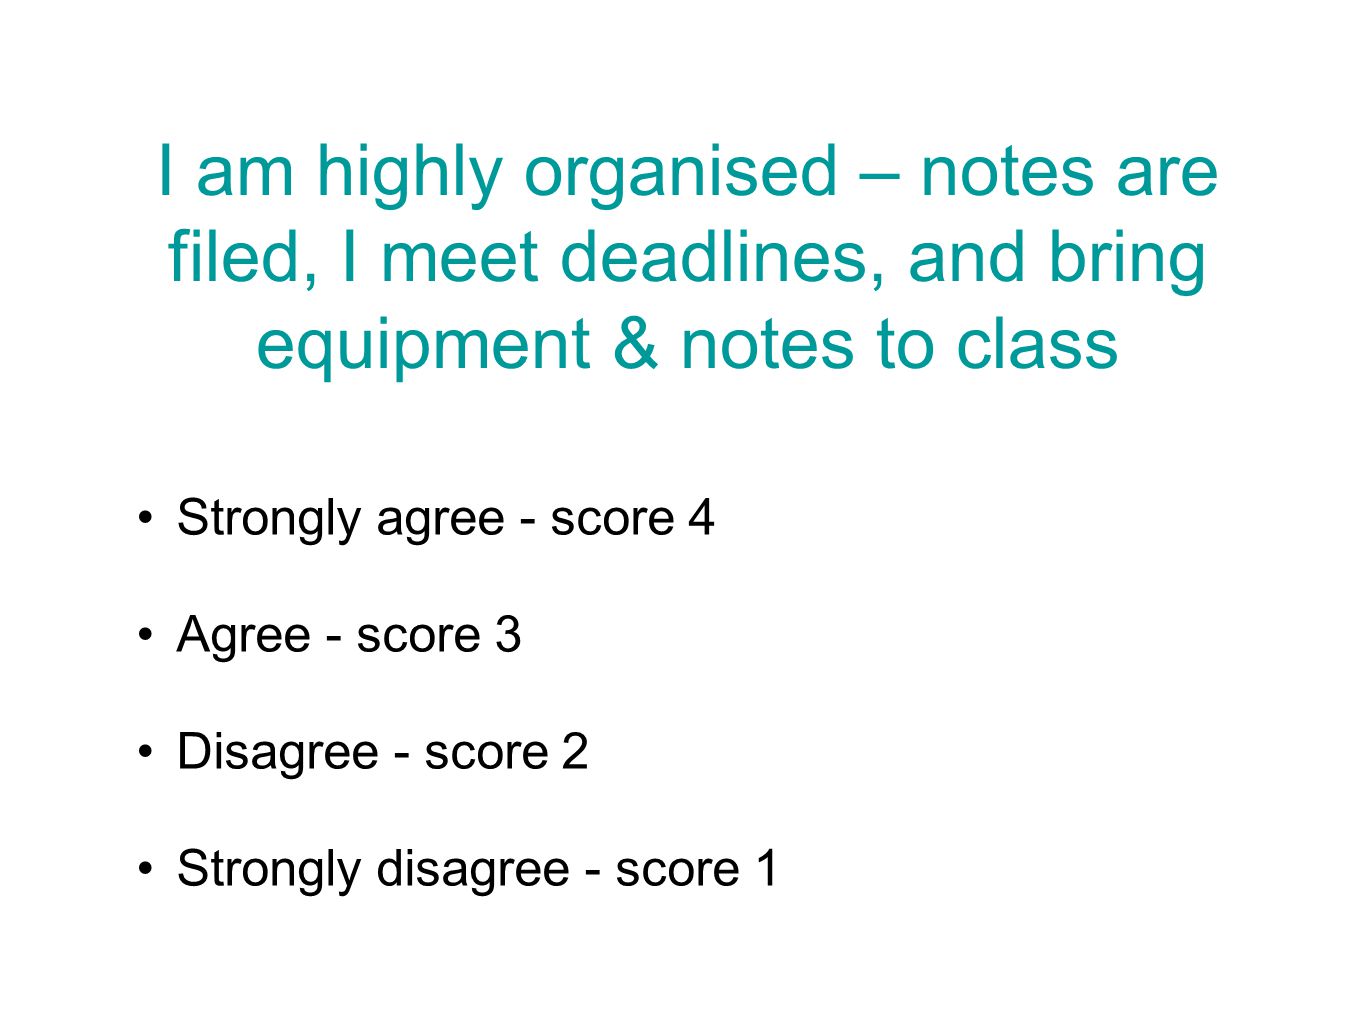 I am highly organised – notes are filed, I meet deadlines, and bring equipment & notes to class Strongly agree - score 4 Agree - score 3 Disagree - score 2 Strongly disagree - score 1